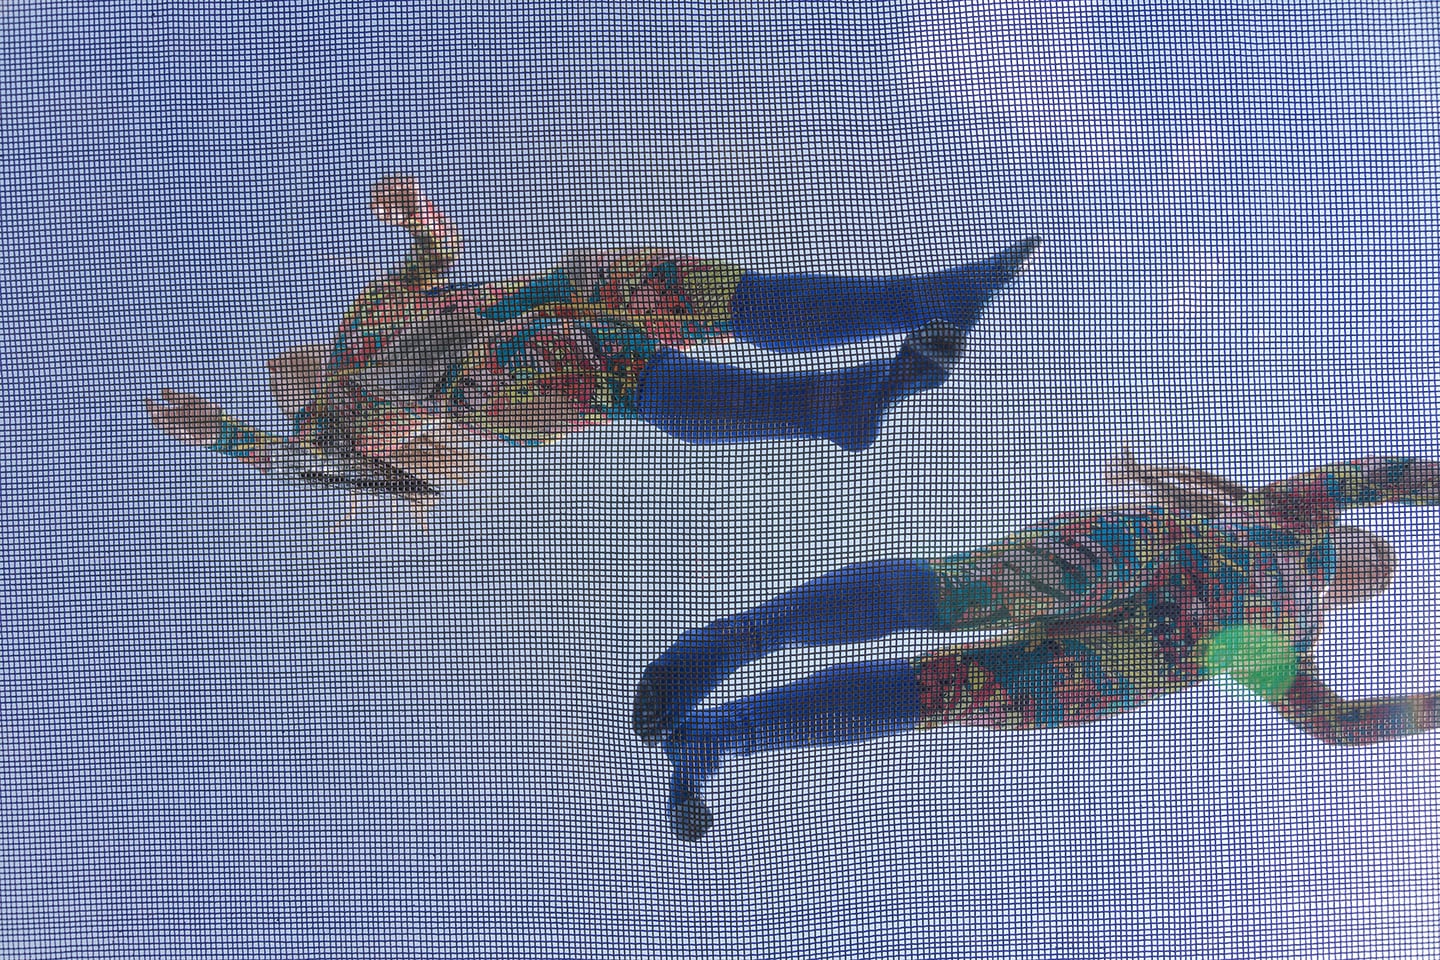 Looking upwards through a trampoline mesh, two colourfully dressed figures are outlined like strange birds against a blue sky